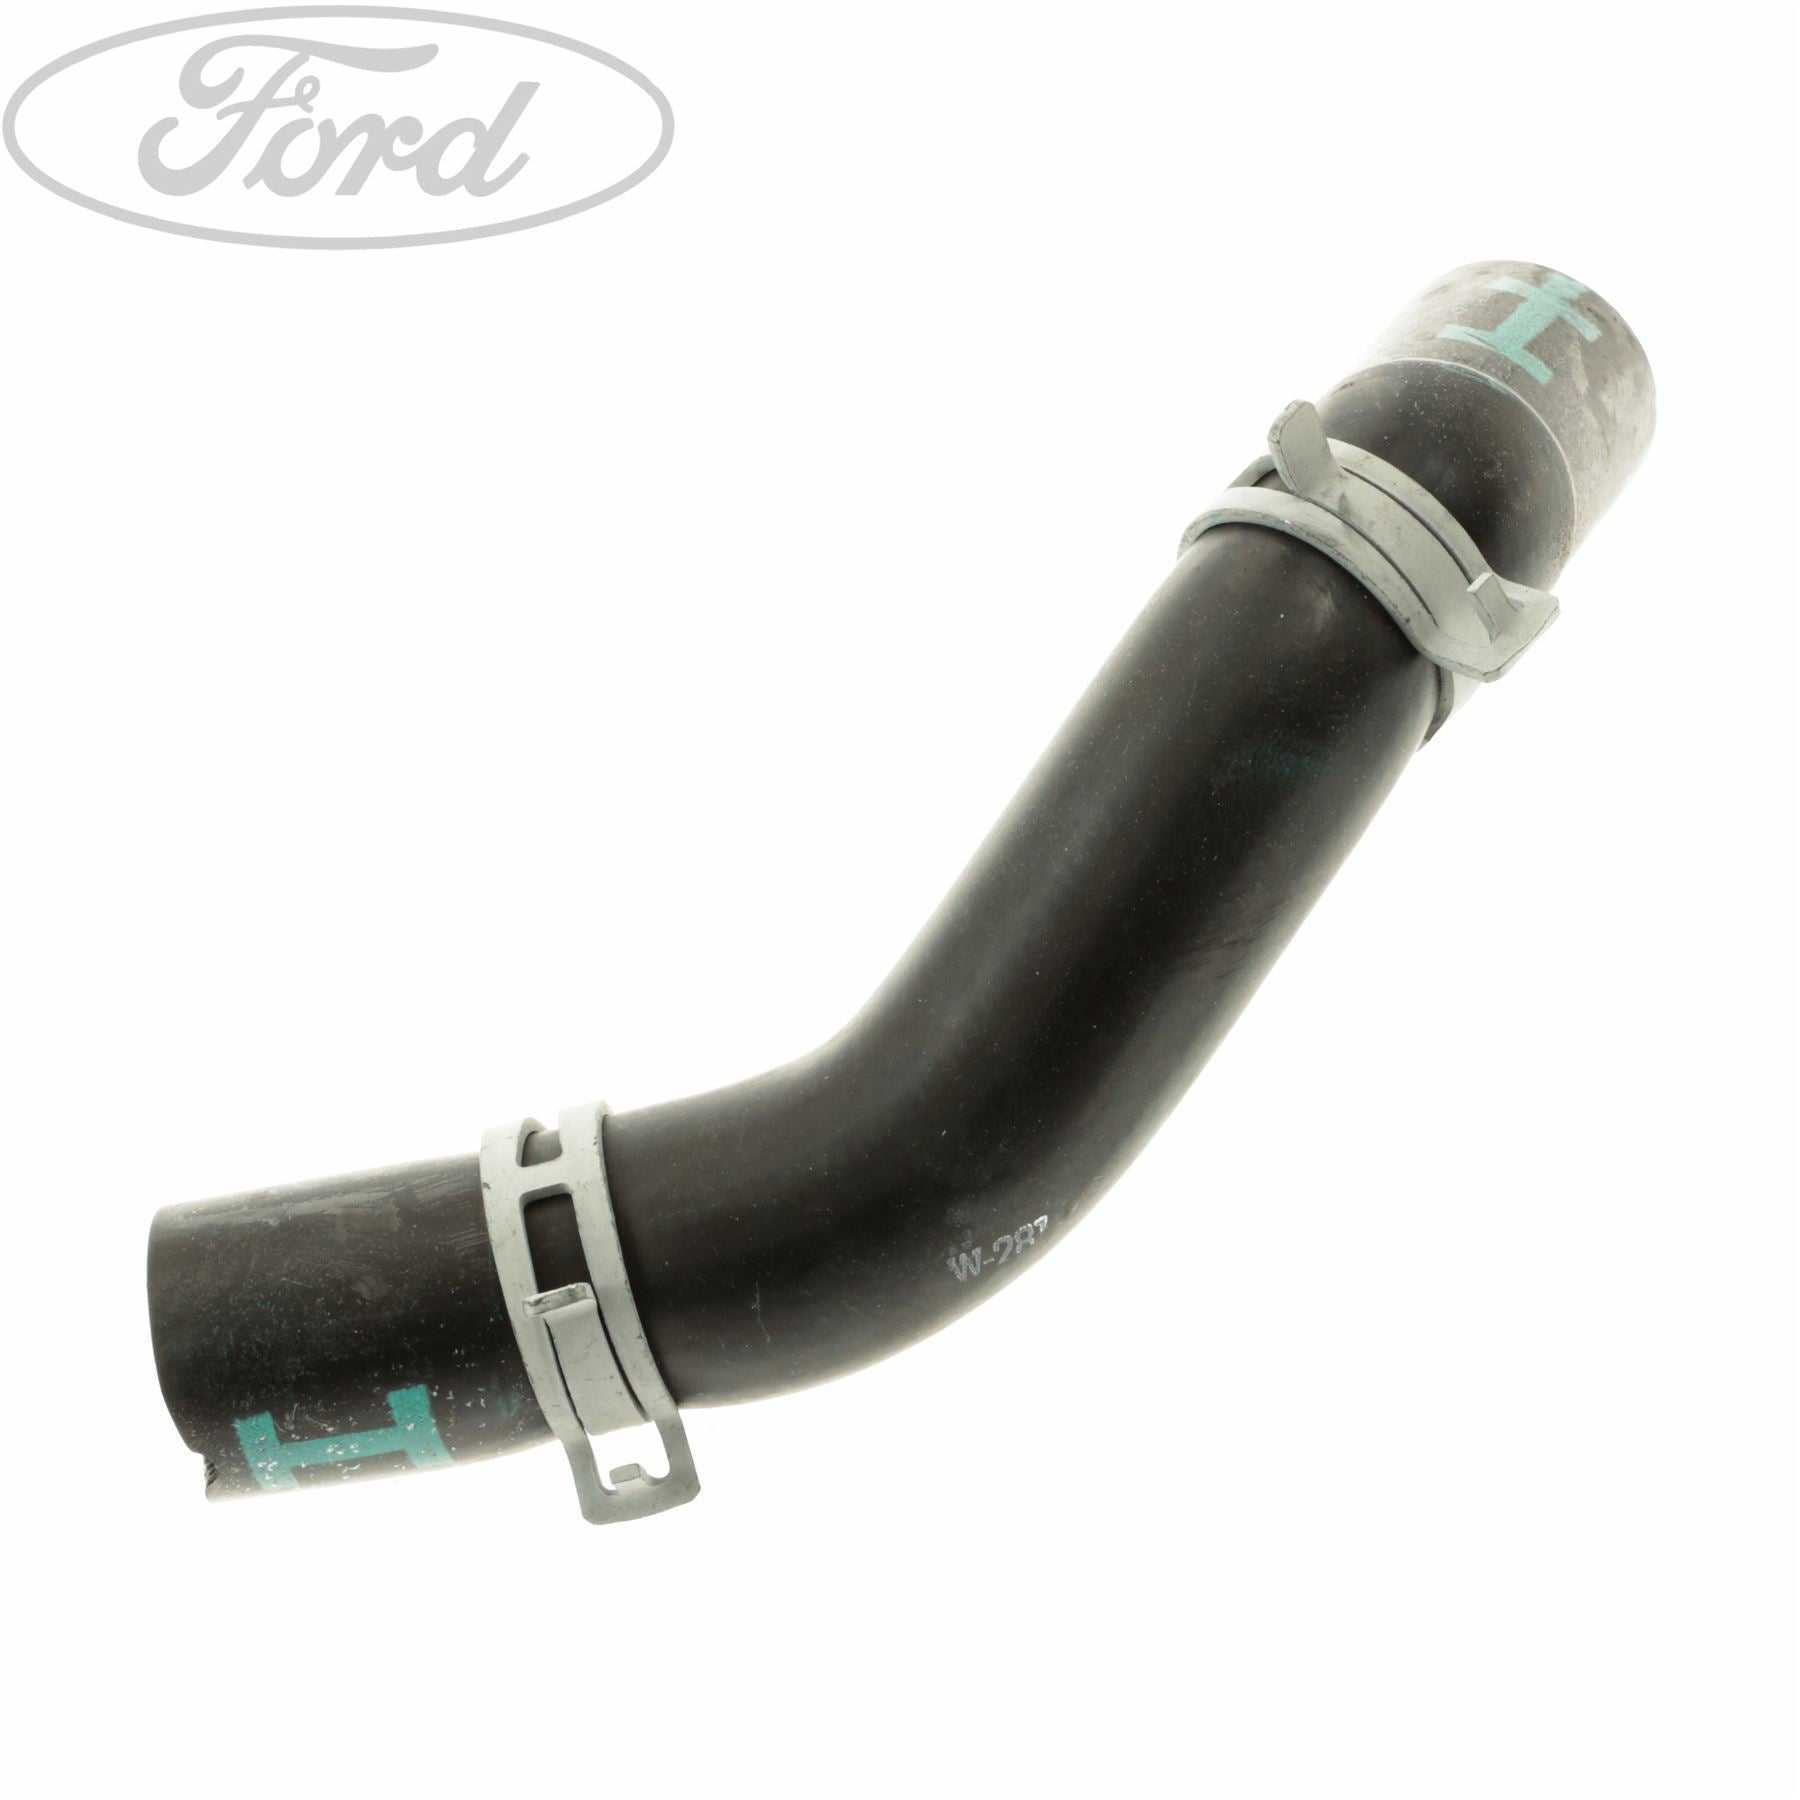 Ford, WATER PUMP HOSE